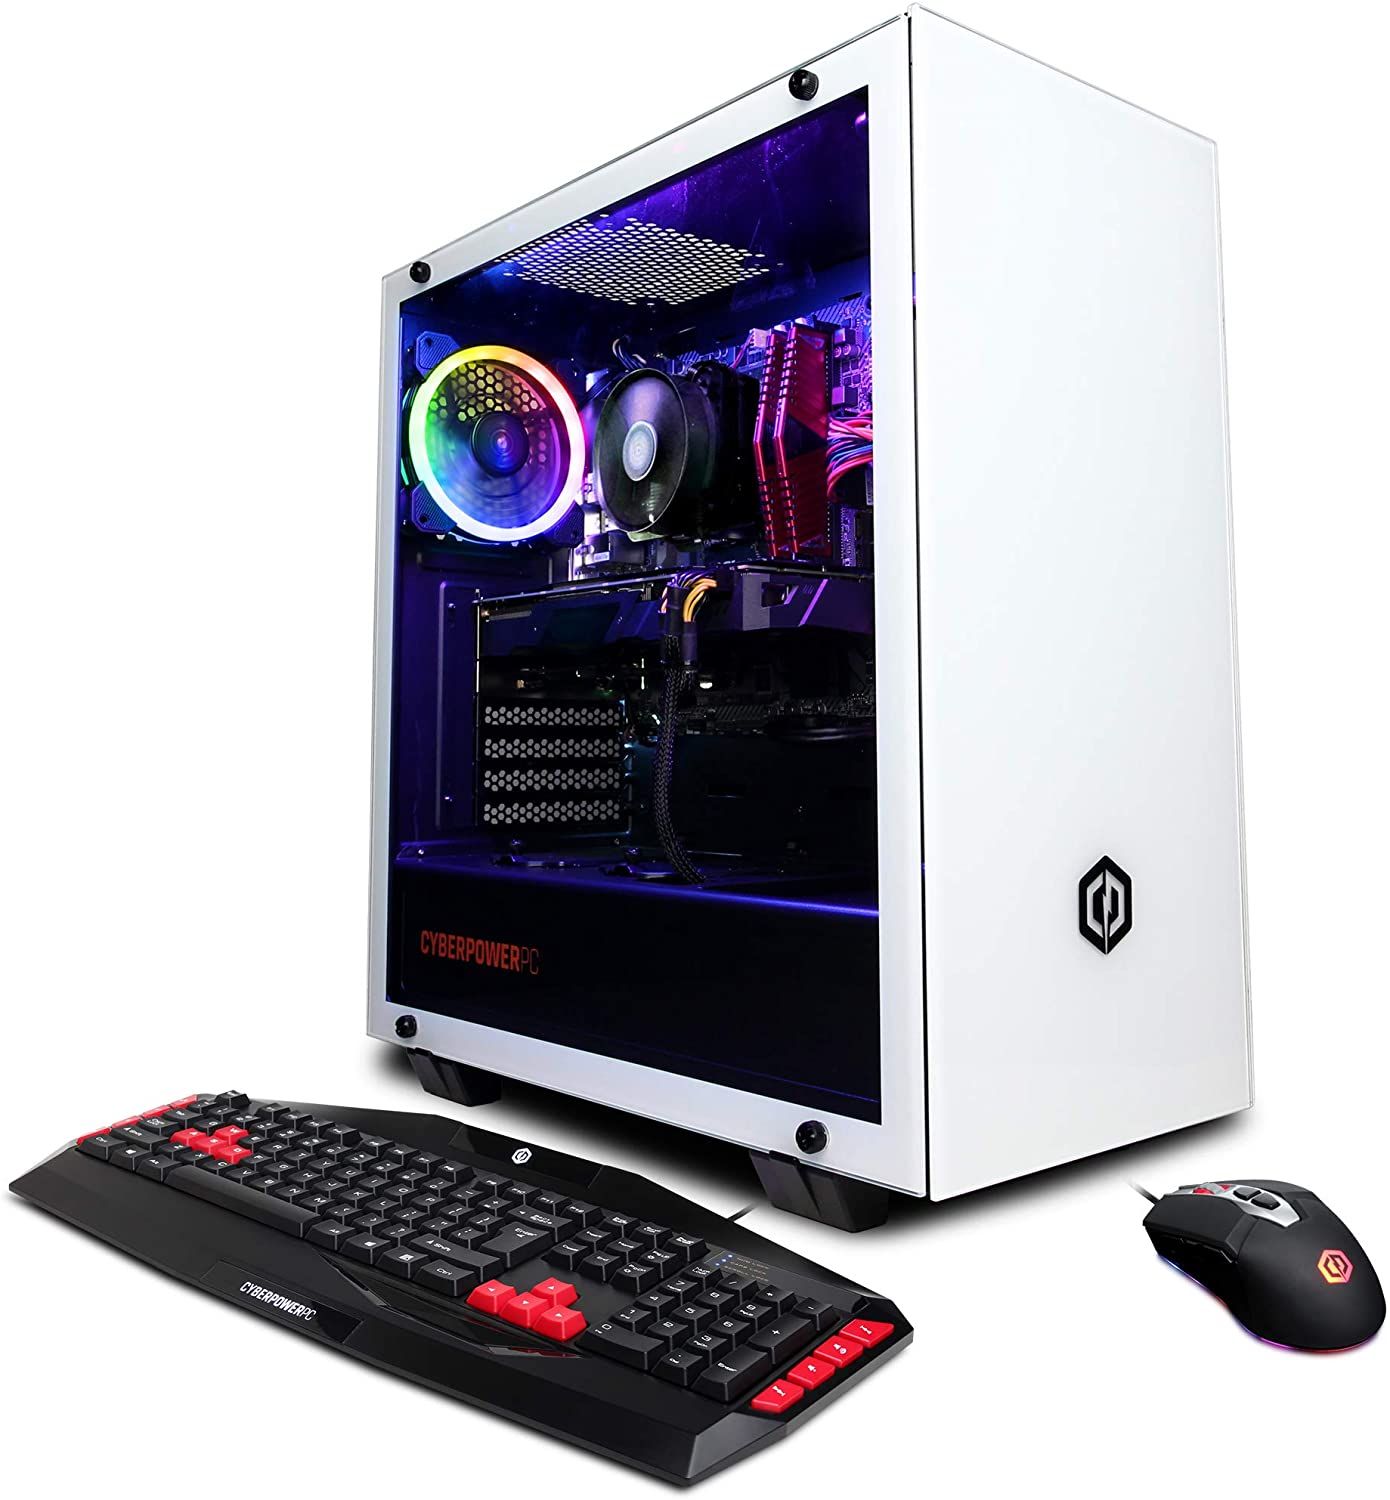  What Is The Best Prebuilt Gaming Pc Brand with RGB